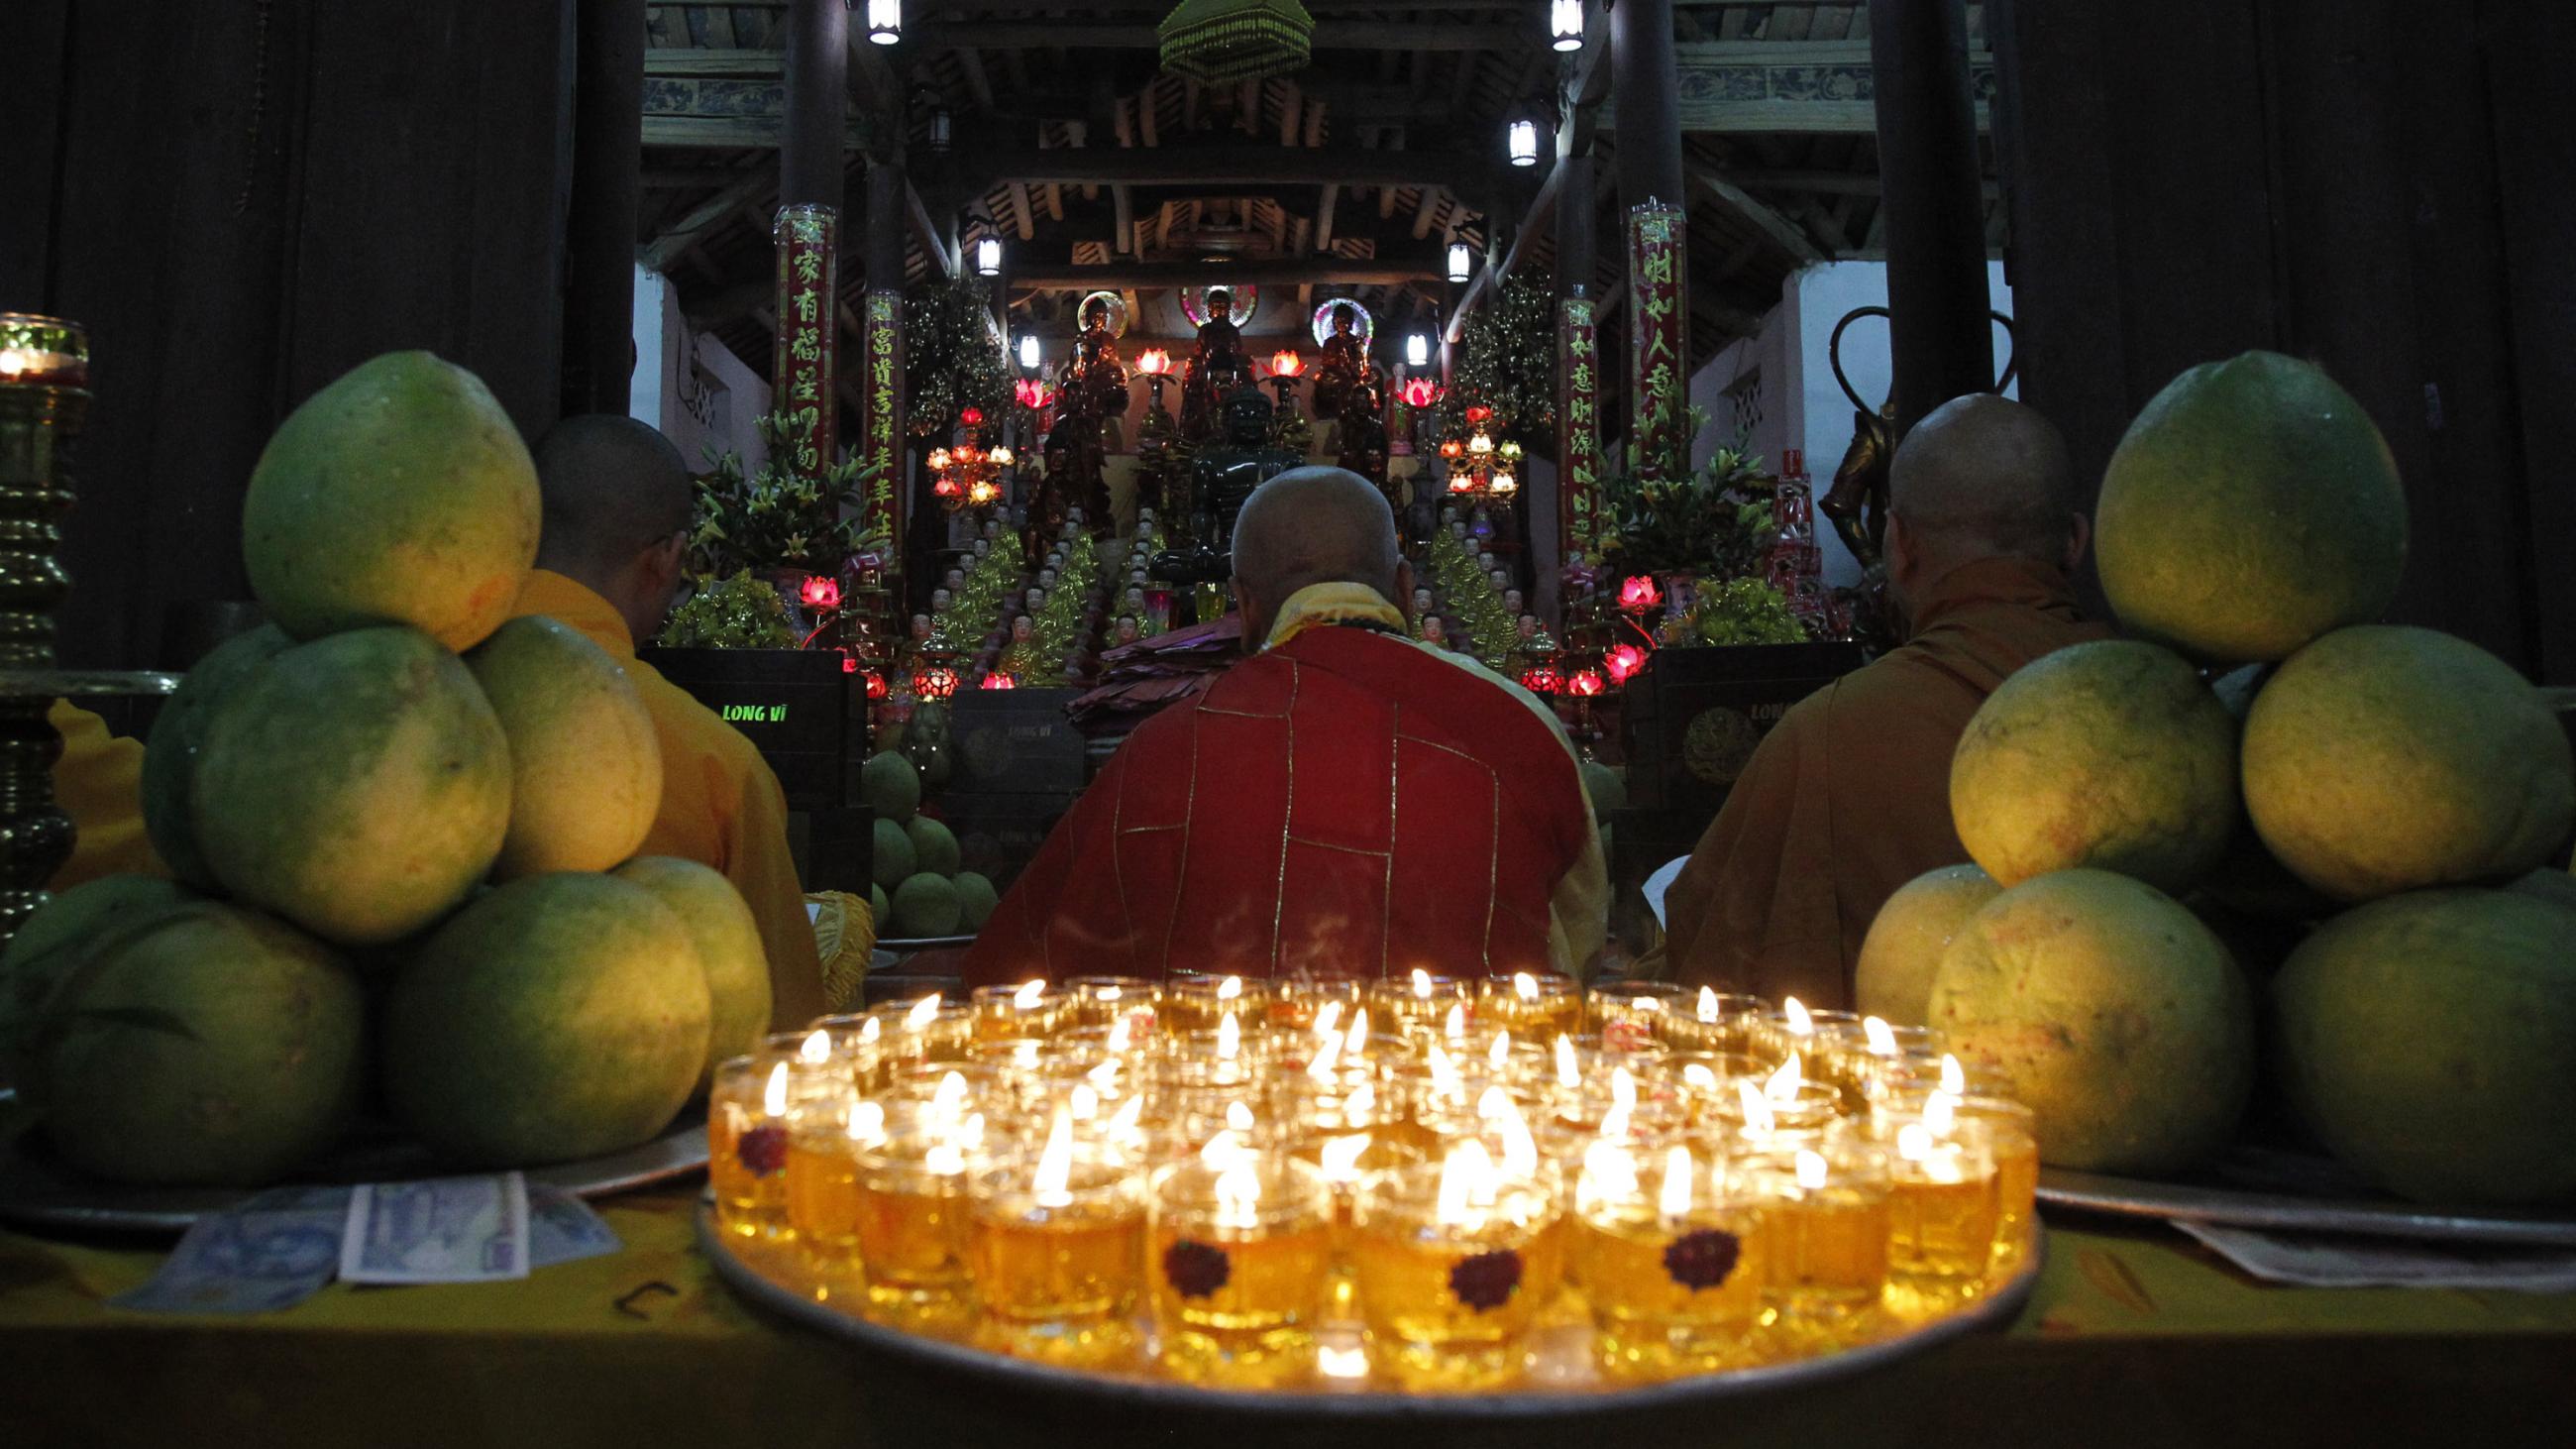 Buddhist monks pray during a ceremony to celebrate the upcoming Mid-Autumn Festival at Duoc Thuong pagoda, outside Hanoi September 11, 2011. The Mid-Autumn Festival also known as Moon Festival which takes place on the 15th day of the eighth month of the Lunar calendar, this year falls on Monday September 12. 